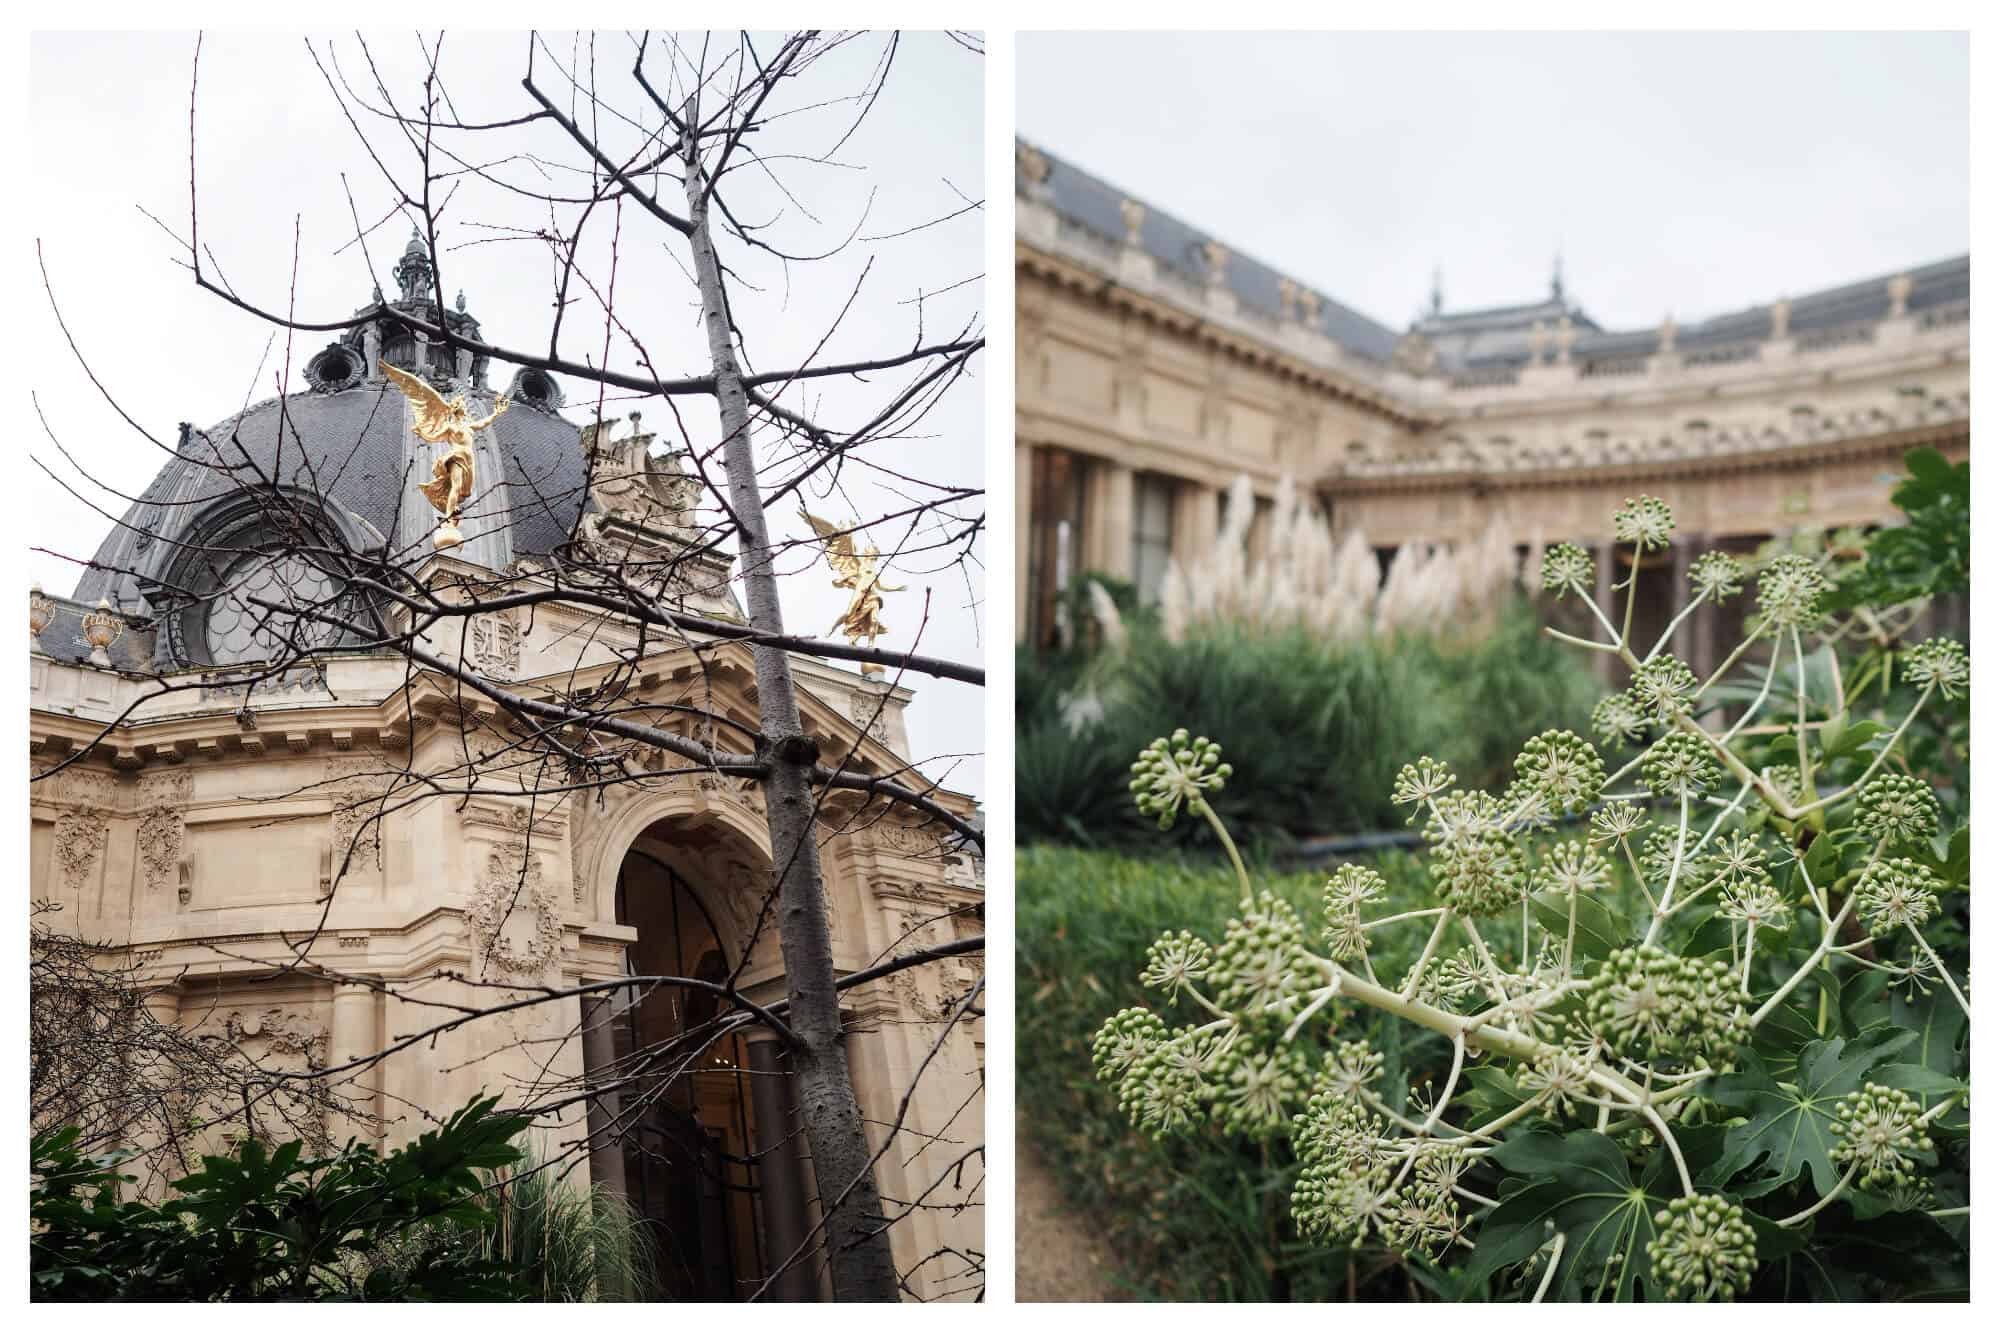 On left: The spindly branches of a tree reach skyward, with the dome of the Petit Palais, Paris' city art museum, rising in the background. On right: Bouncy little flowers begin to sprout in the garden of the Petit Palais, located on the Champs Elysées. 